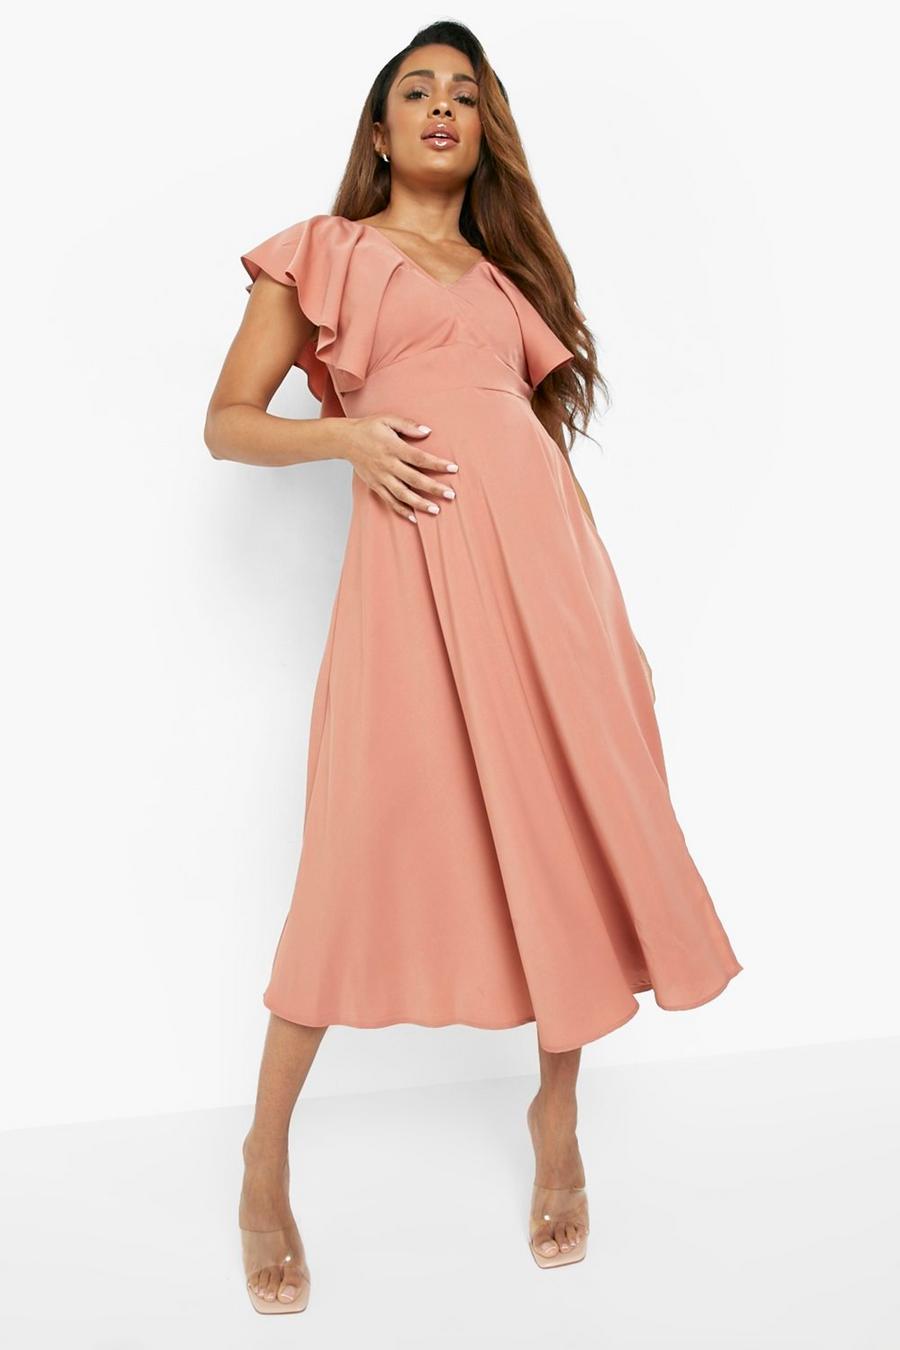 Baked coral Maternity Occasion Tie Back Frill Midi Dress